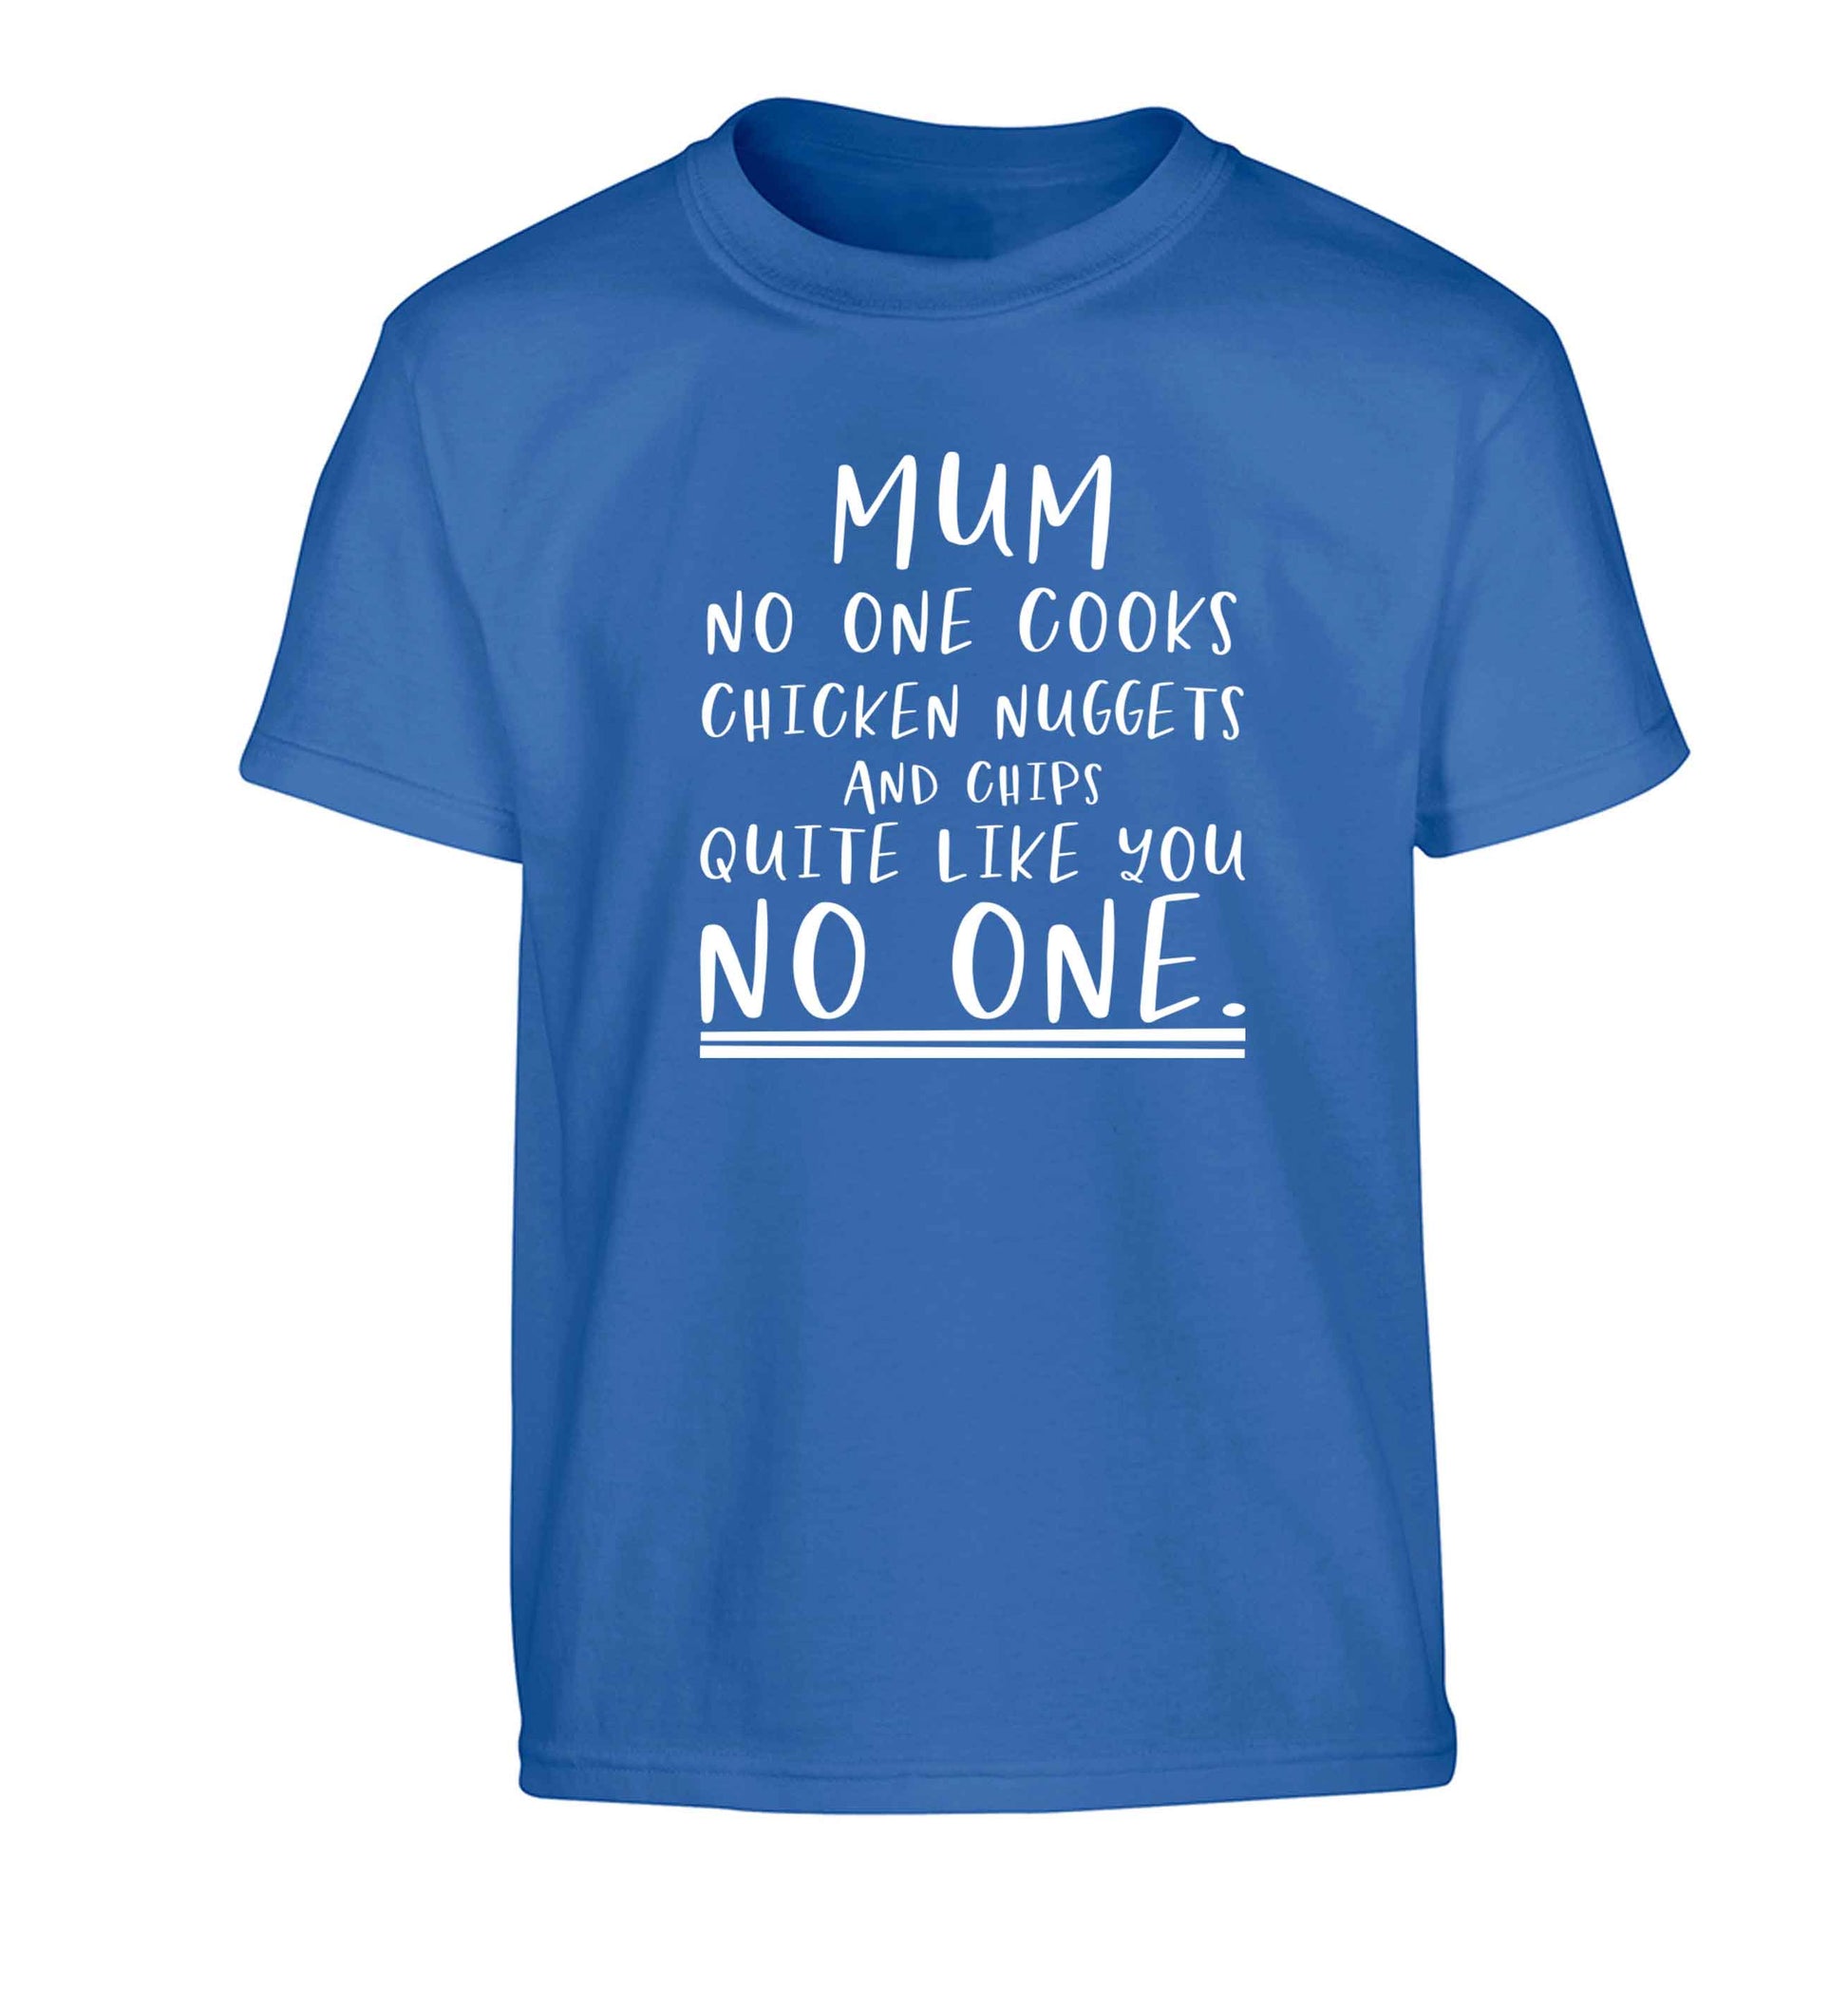 Super funny sassy gift for mother's day or birthday!  Mum no one cooks chicken nuggets and chips like you no one Children's blue Tshirt 12-13 Years